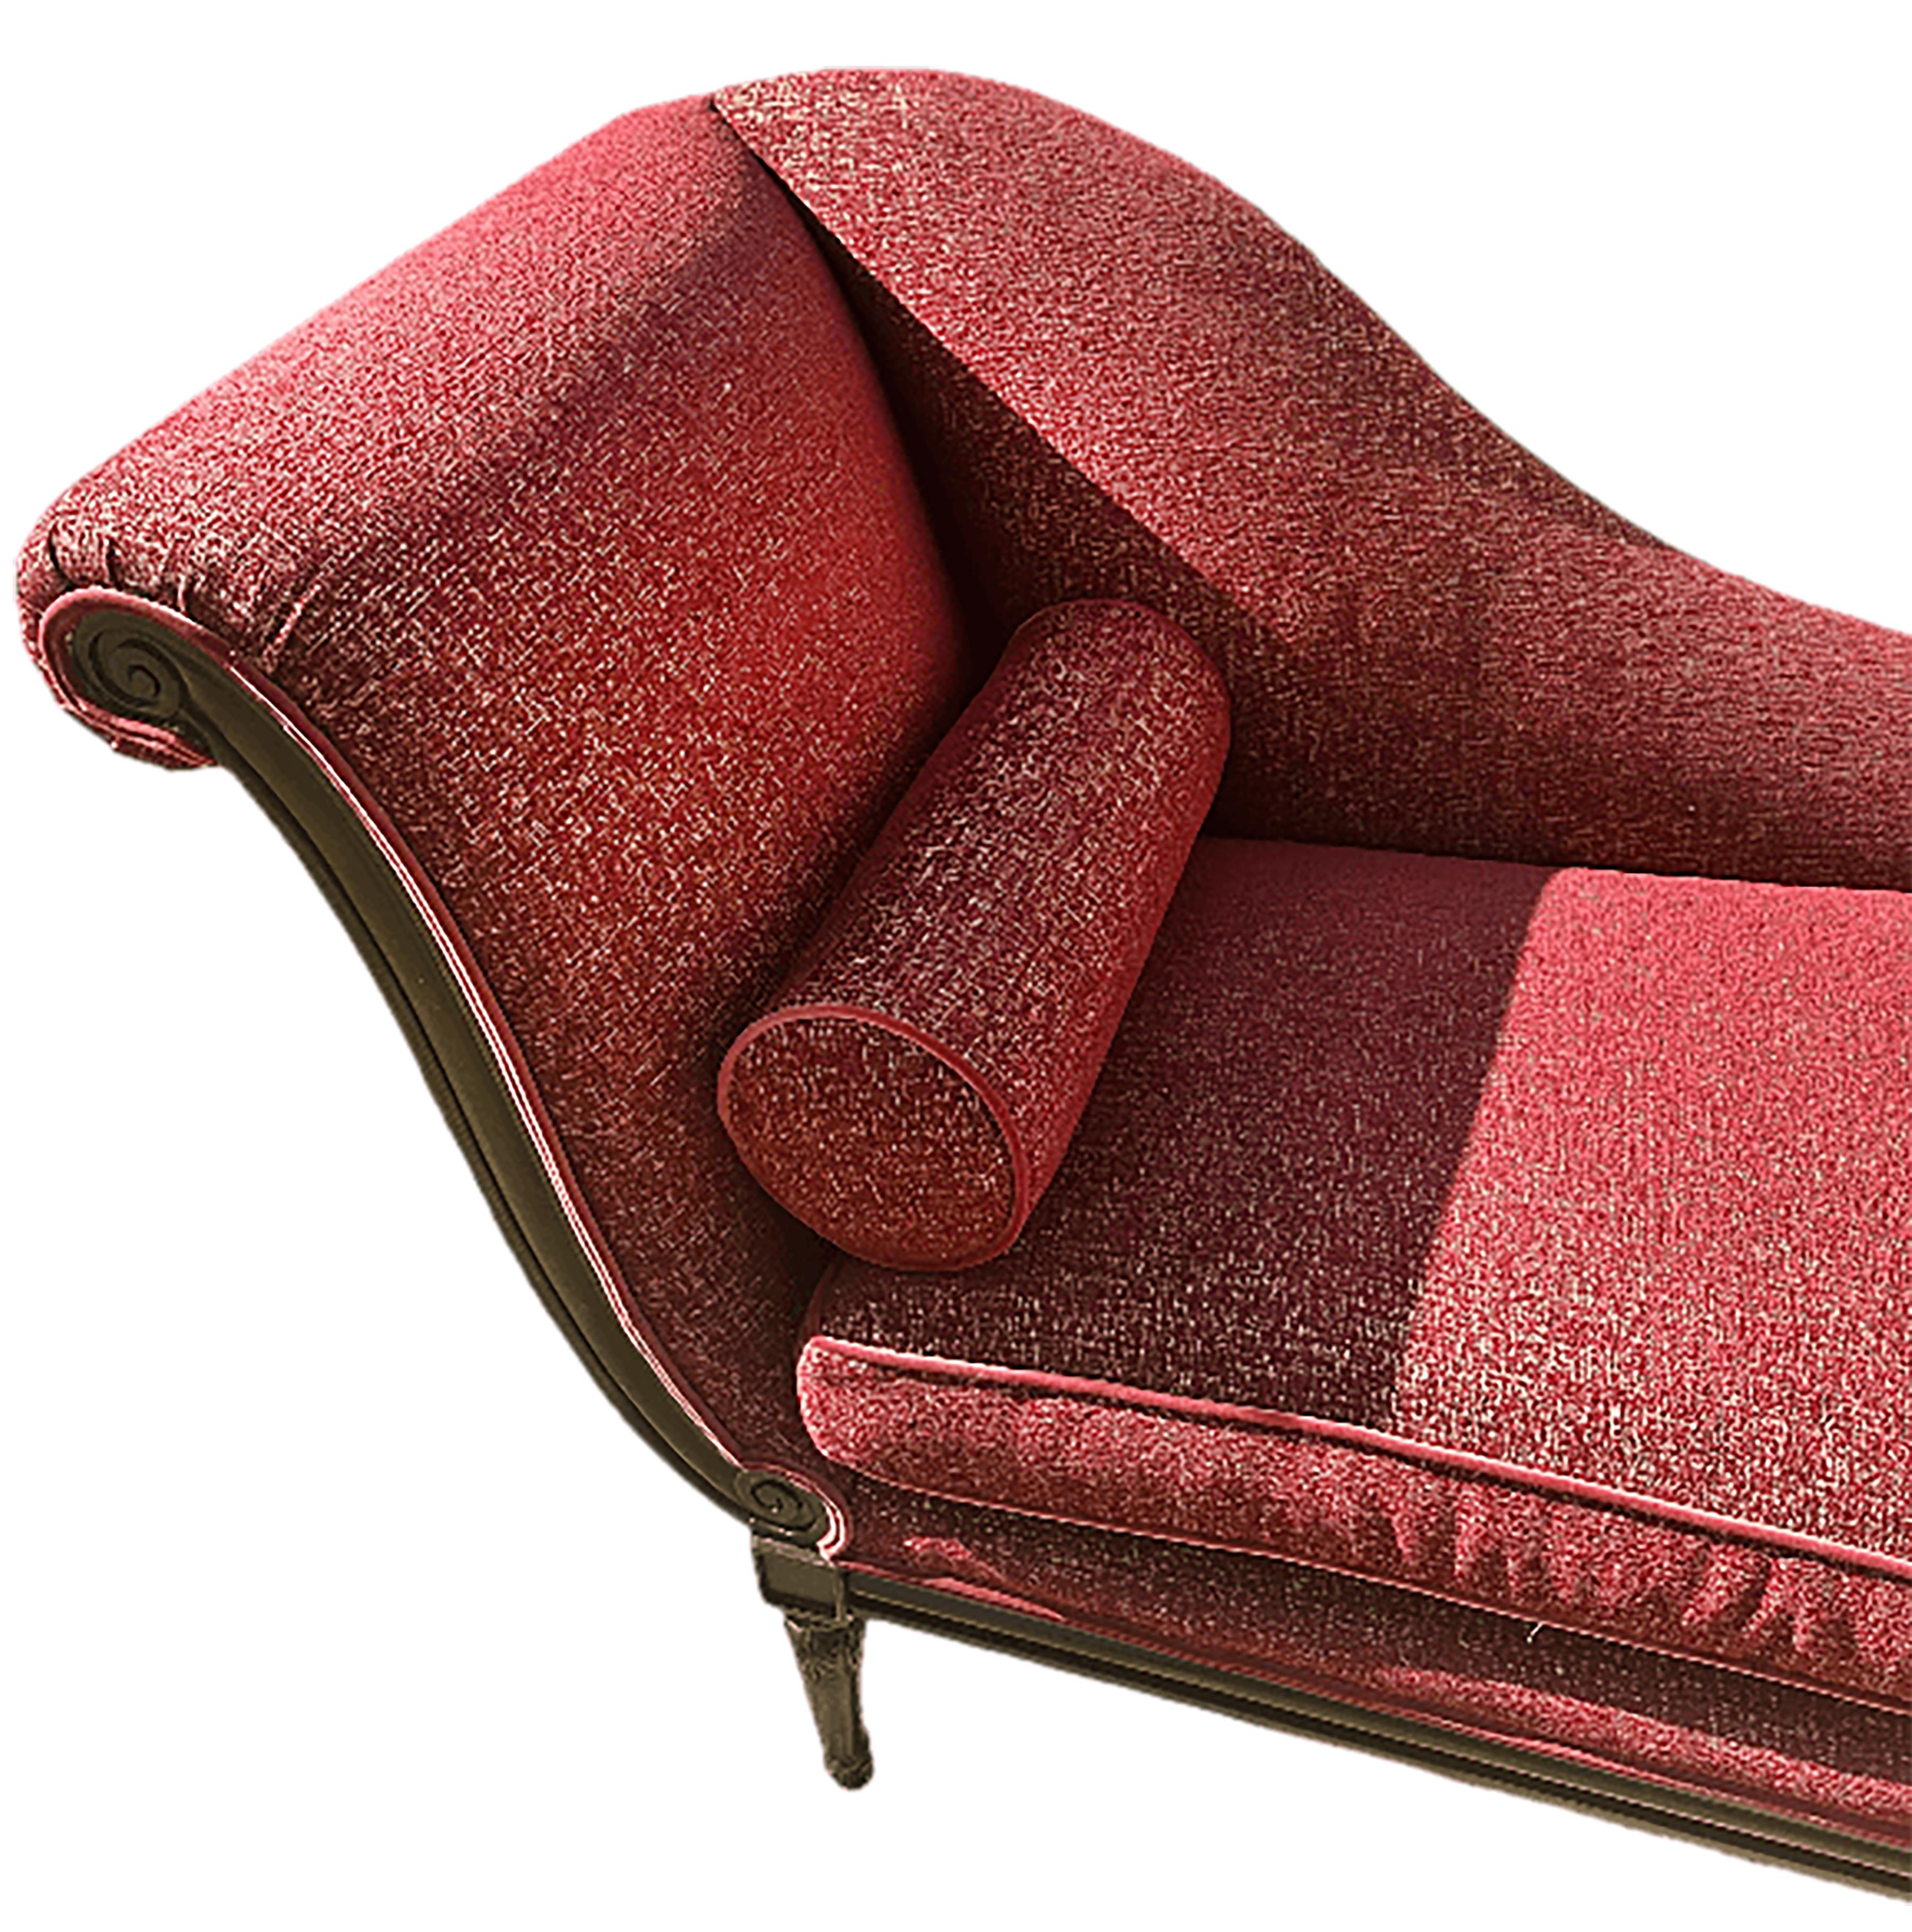 old chaise lounge